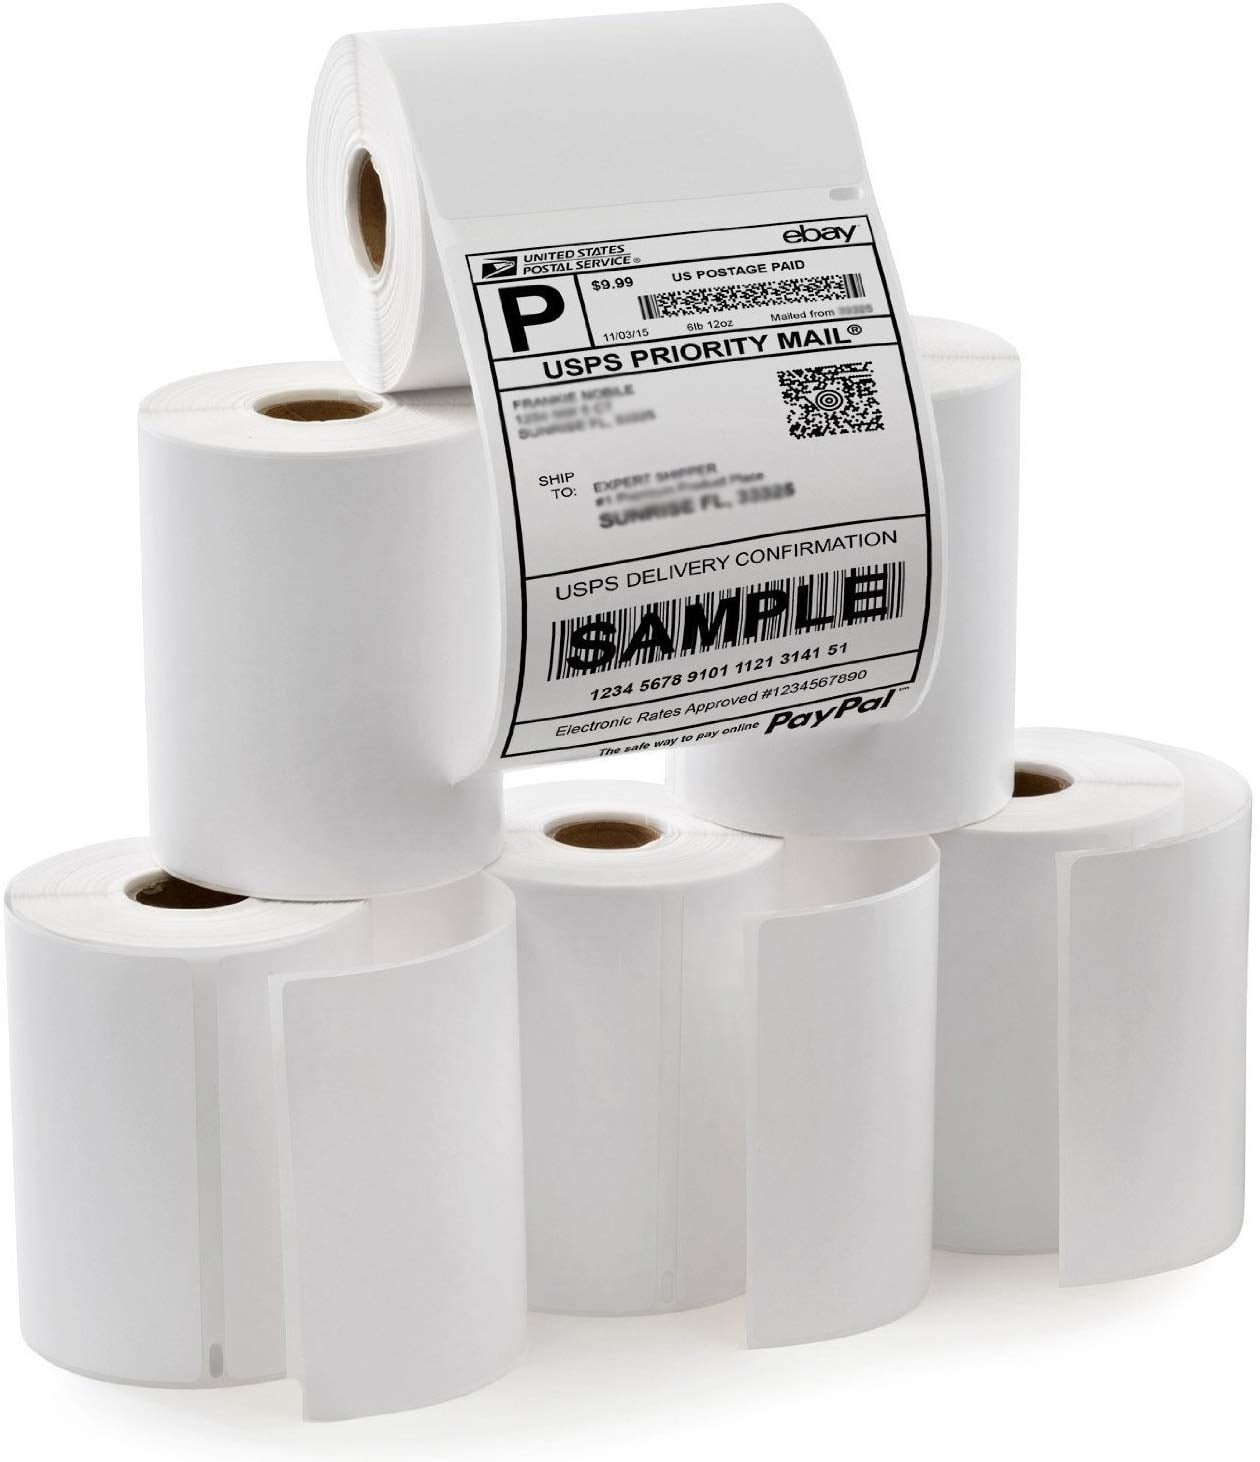 1-100 Rolls 350 4x6 Direct Thermal Shipping Labels LabelWriter Self Adhesive 